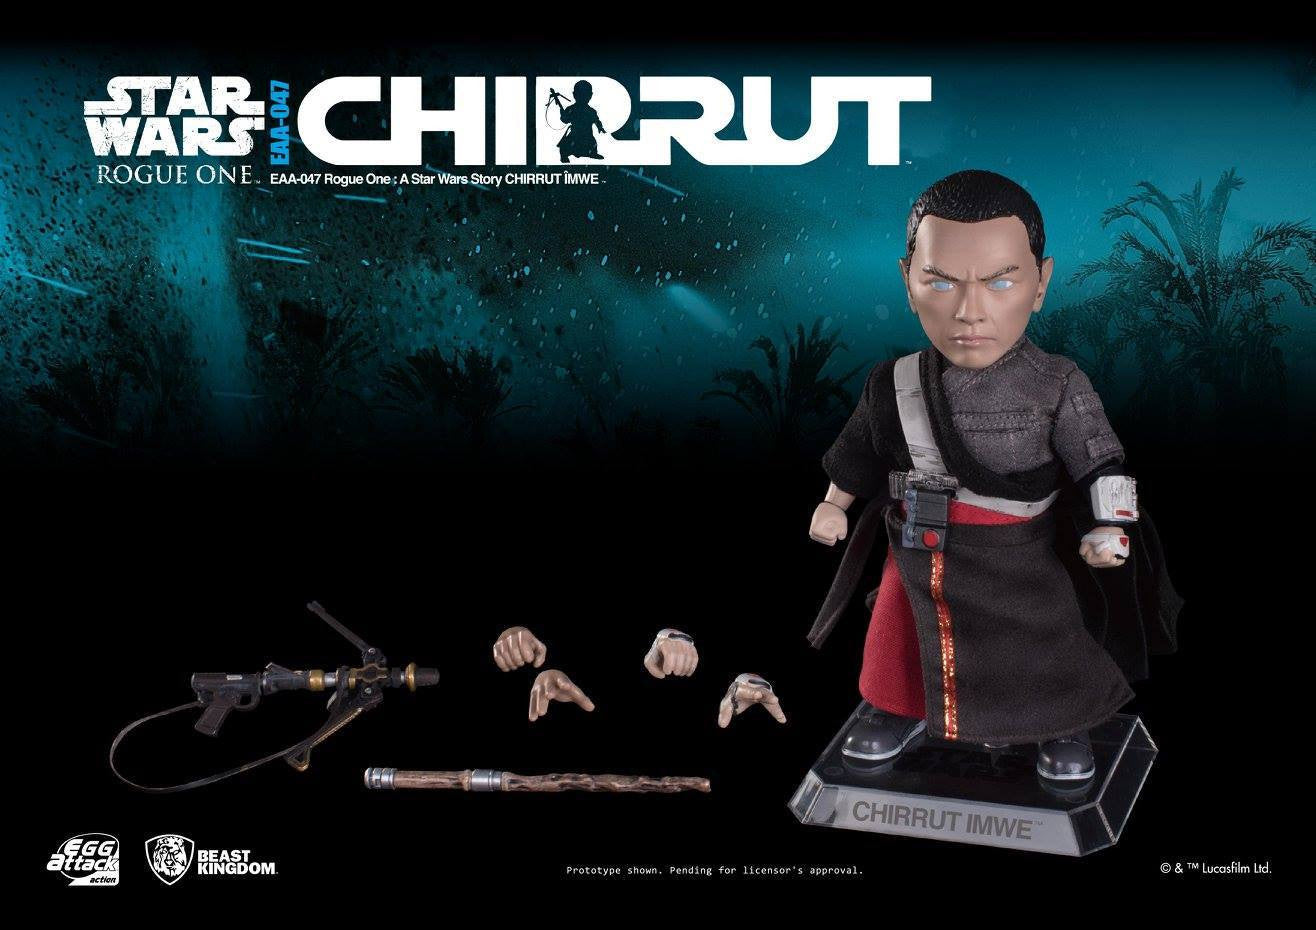 Egg Attack Action - EAA-047 - Rogue One: A Star Wars Story - Chirrut Imwe - Marvelous Toys